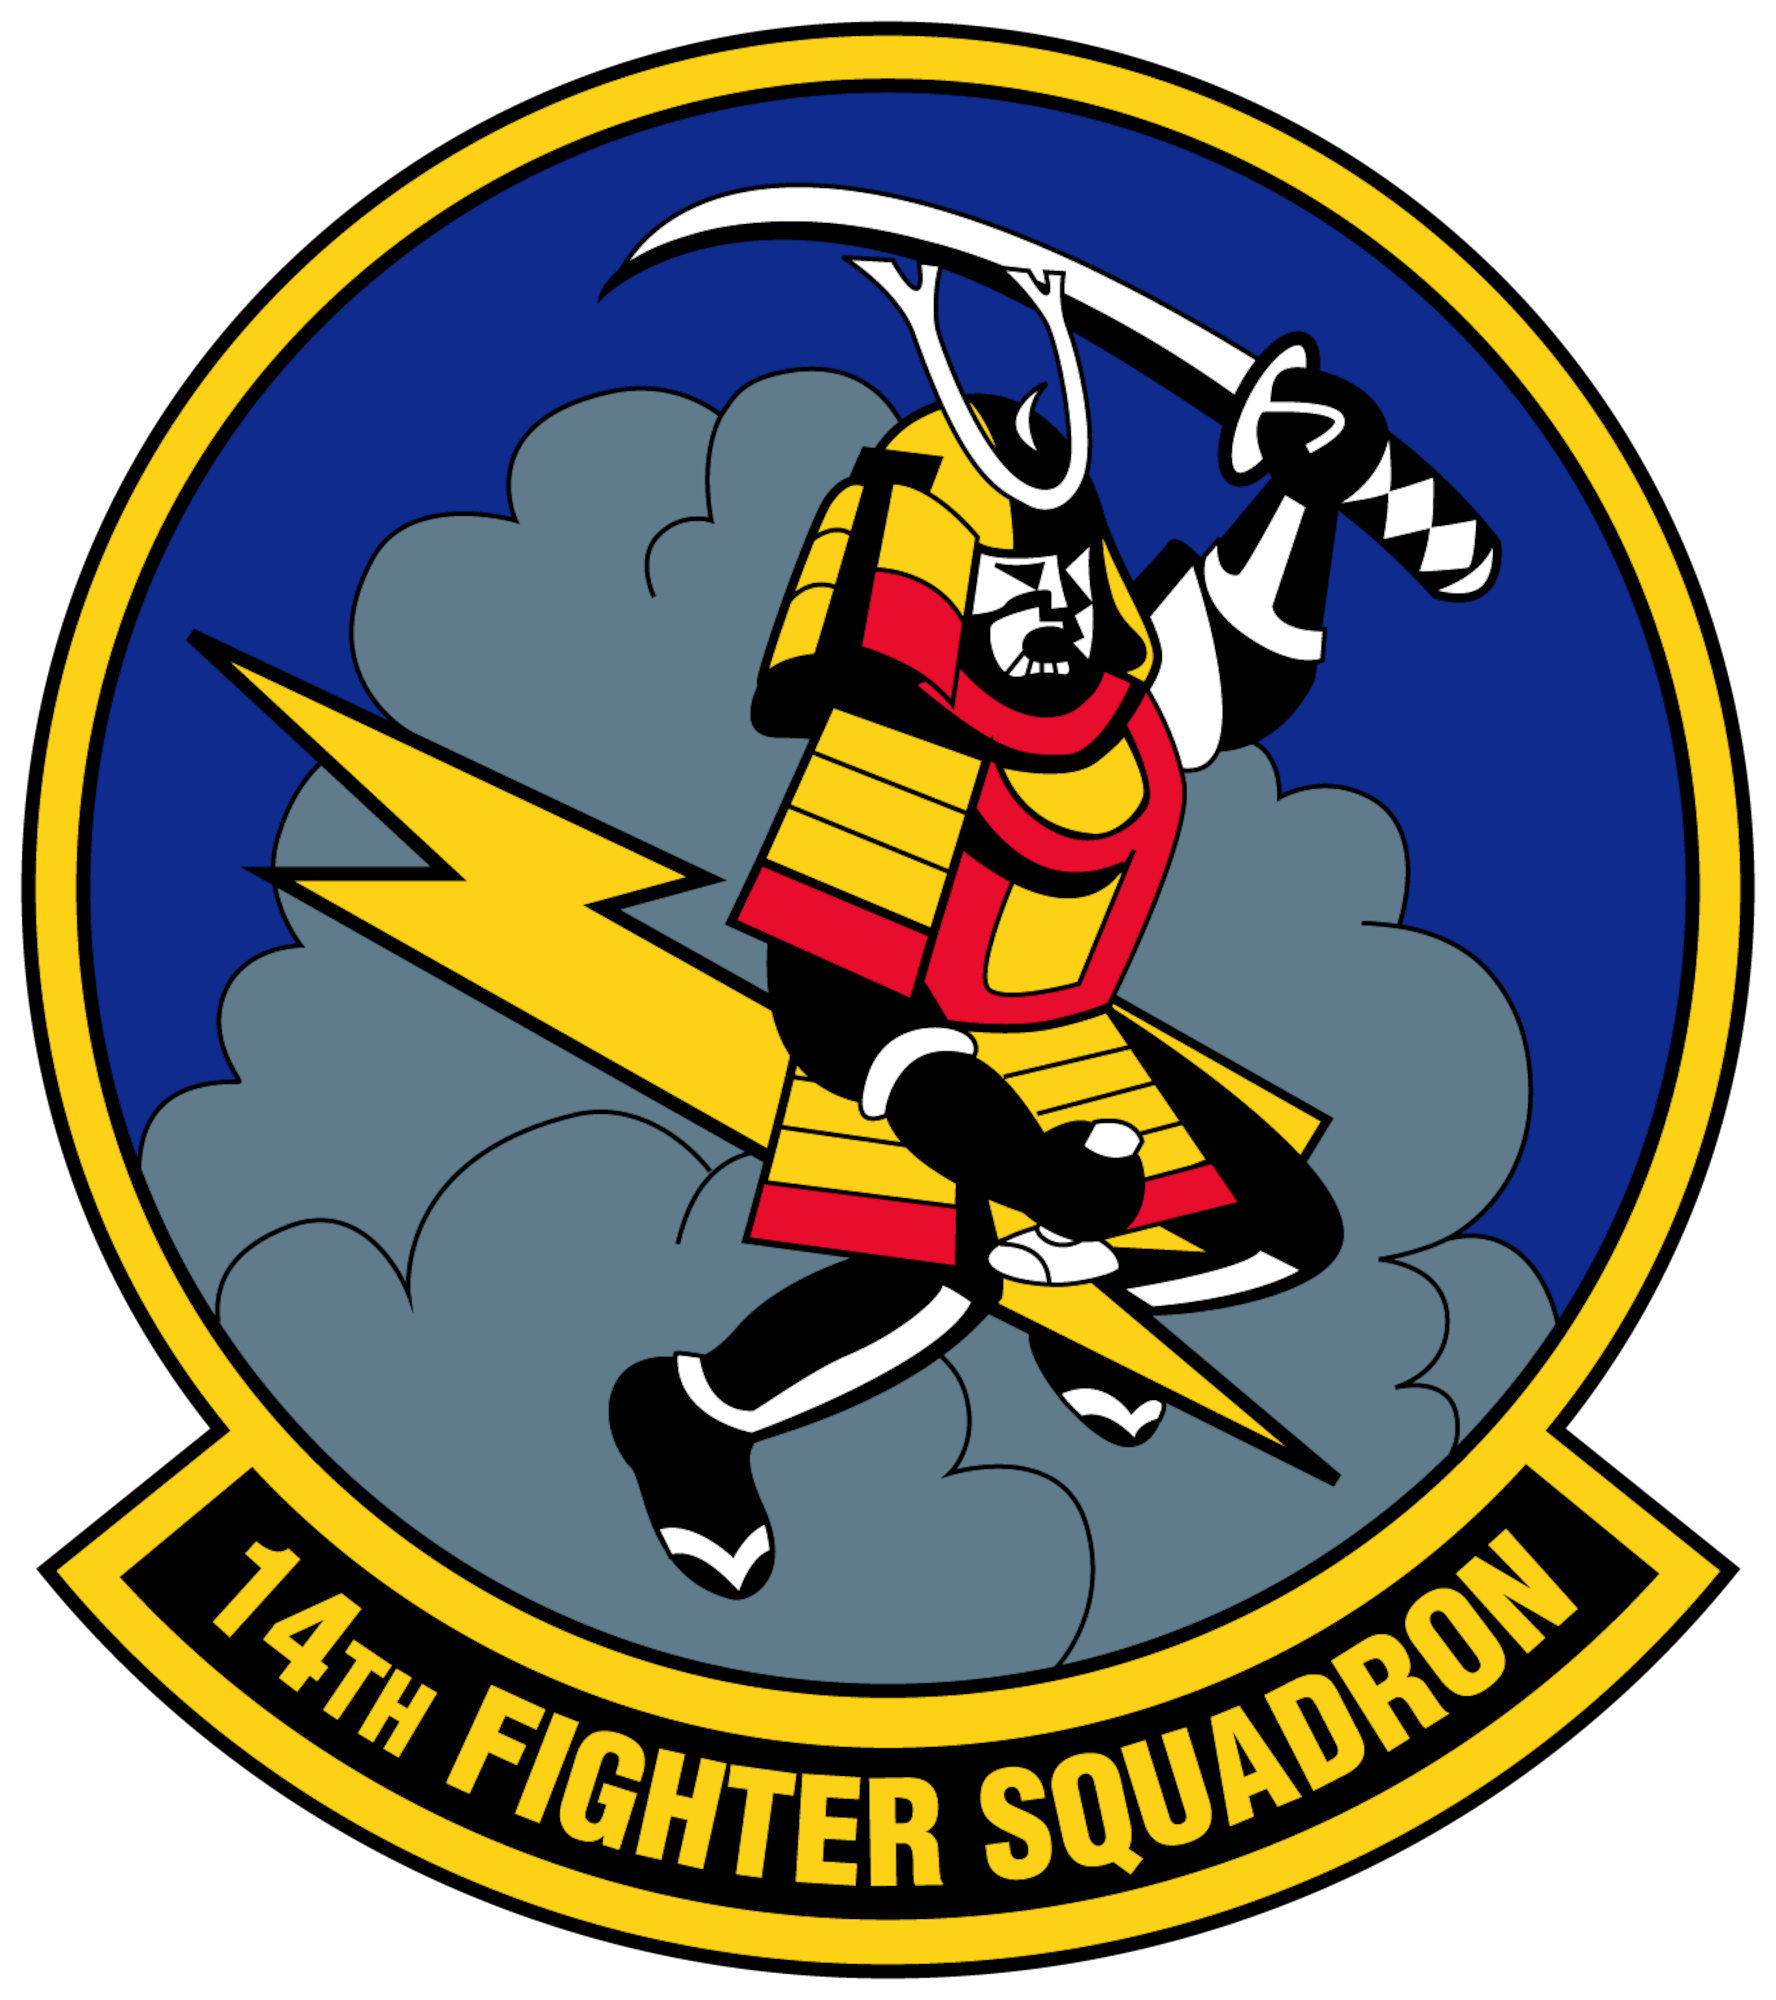 The Air Force approved the 14th Fighter Squadron “Fighting Samurai” emblem on January 7, 1993. The Air Force assigned the squadron under the 35th Fighter Wing, 35th Operations Group on October 1, 1994. (Graphic courtesy of U.S. Air Force)